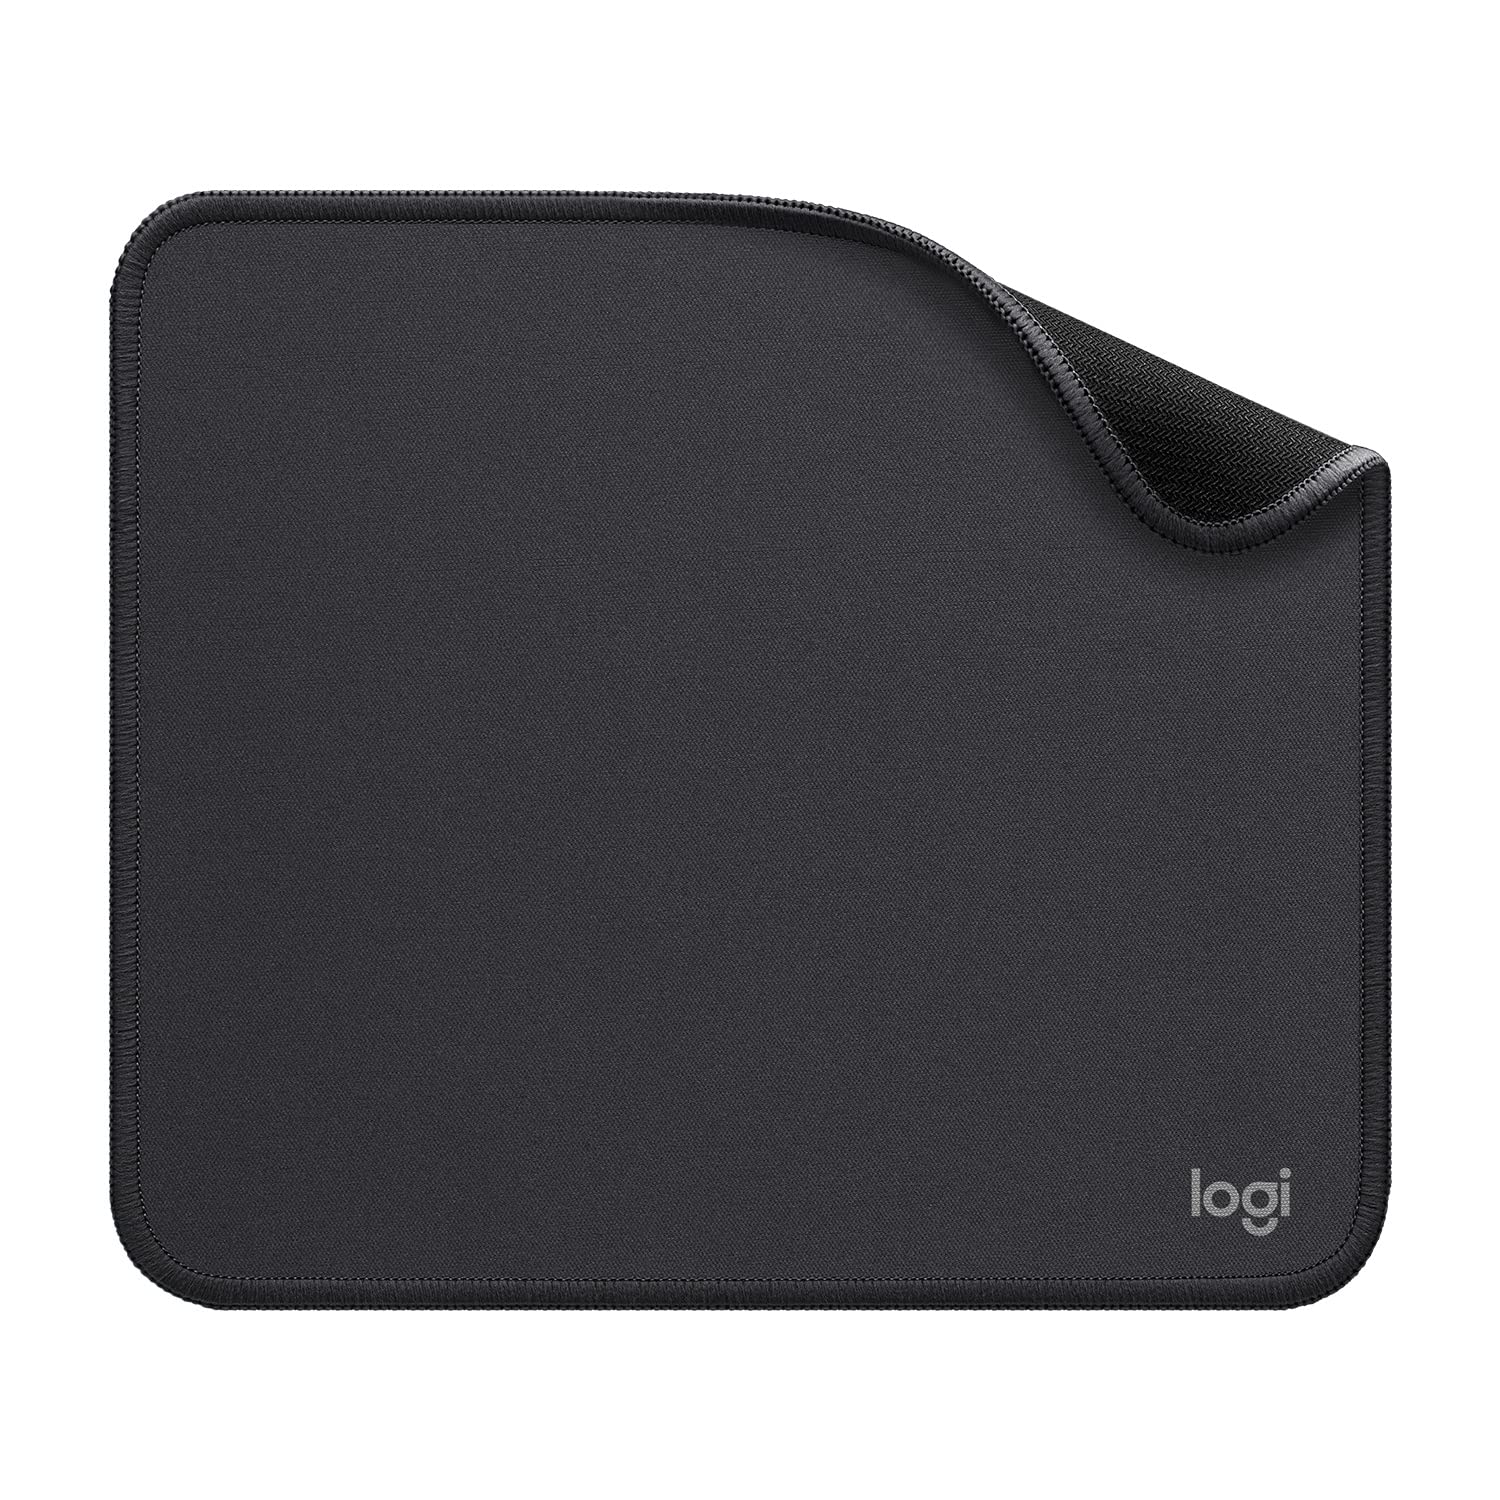 Logitech Mouse Pad - Studio Series Soft mouse pad for comfortable and effortless gliding. - Golchha Computers